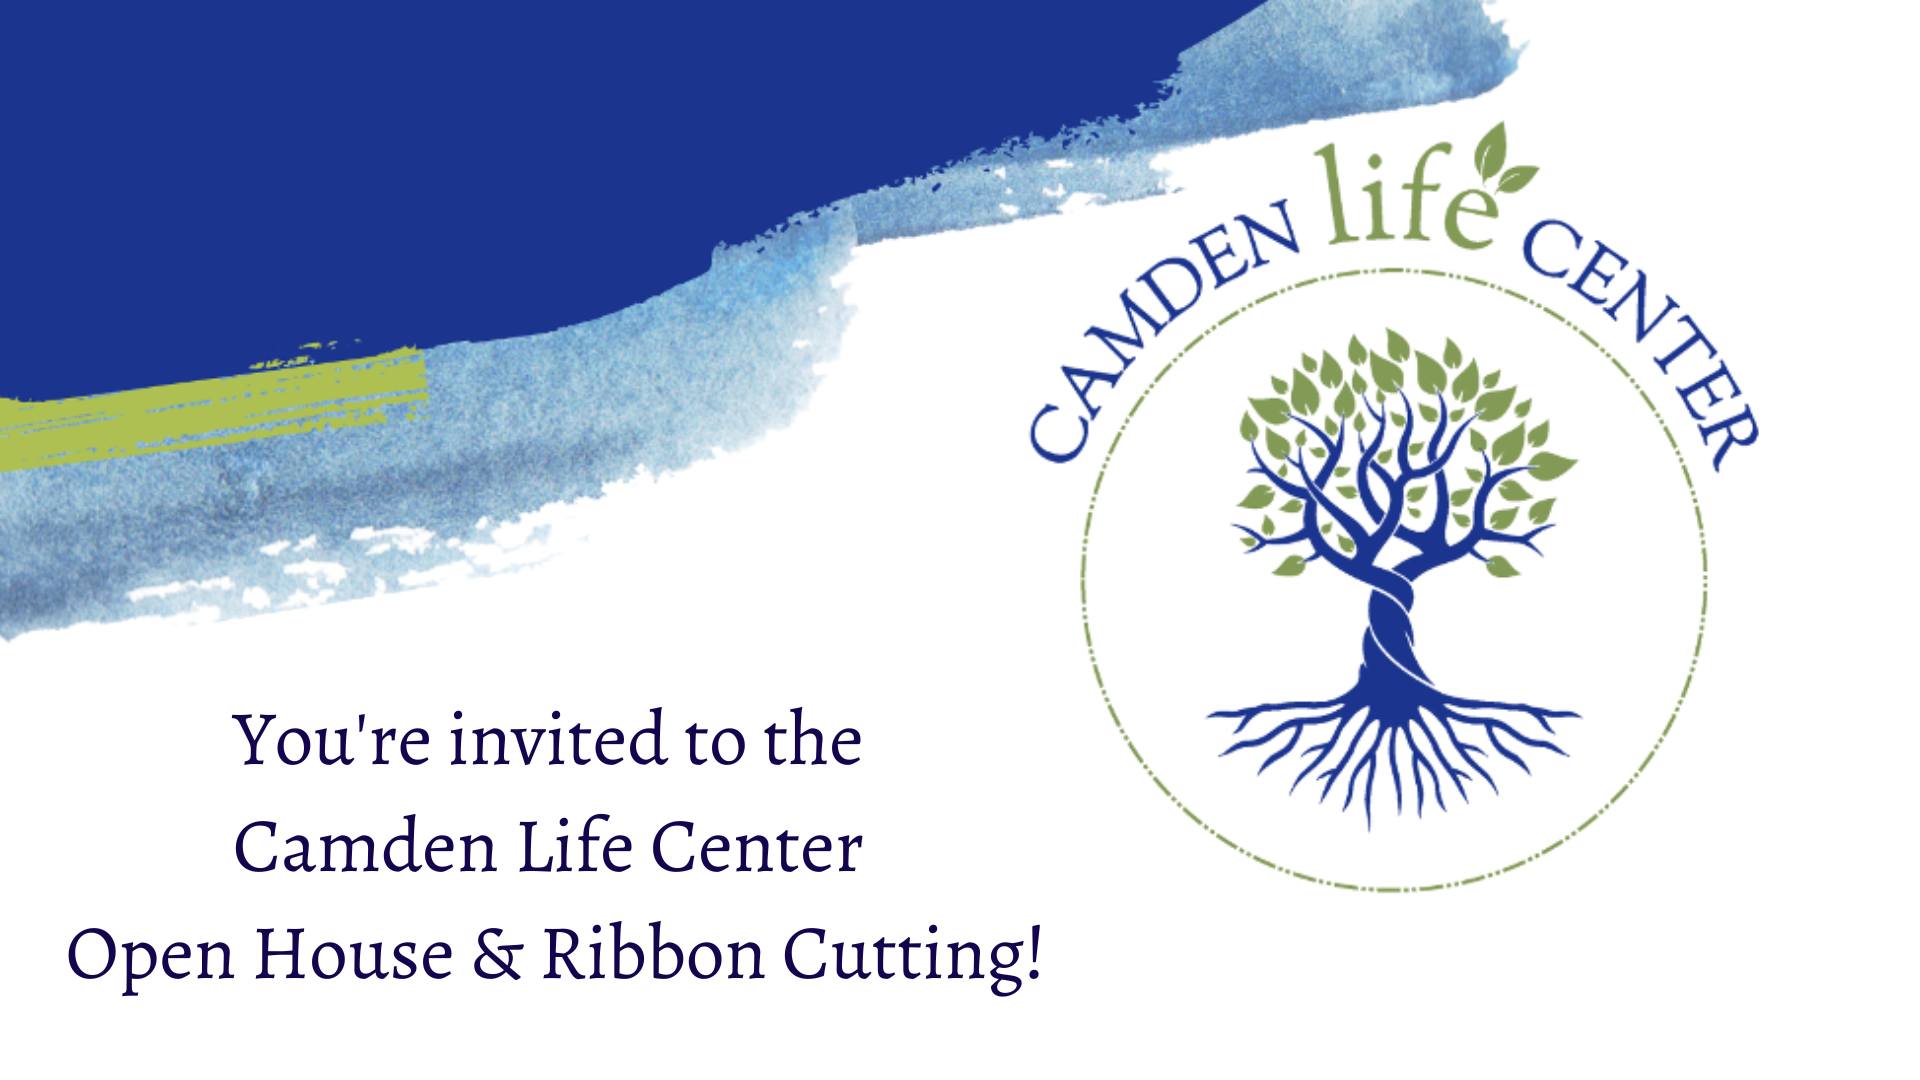 Ribbon-Cutting Ceremony during Open House at The Camden Life Center